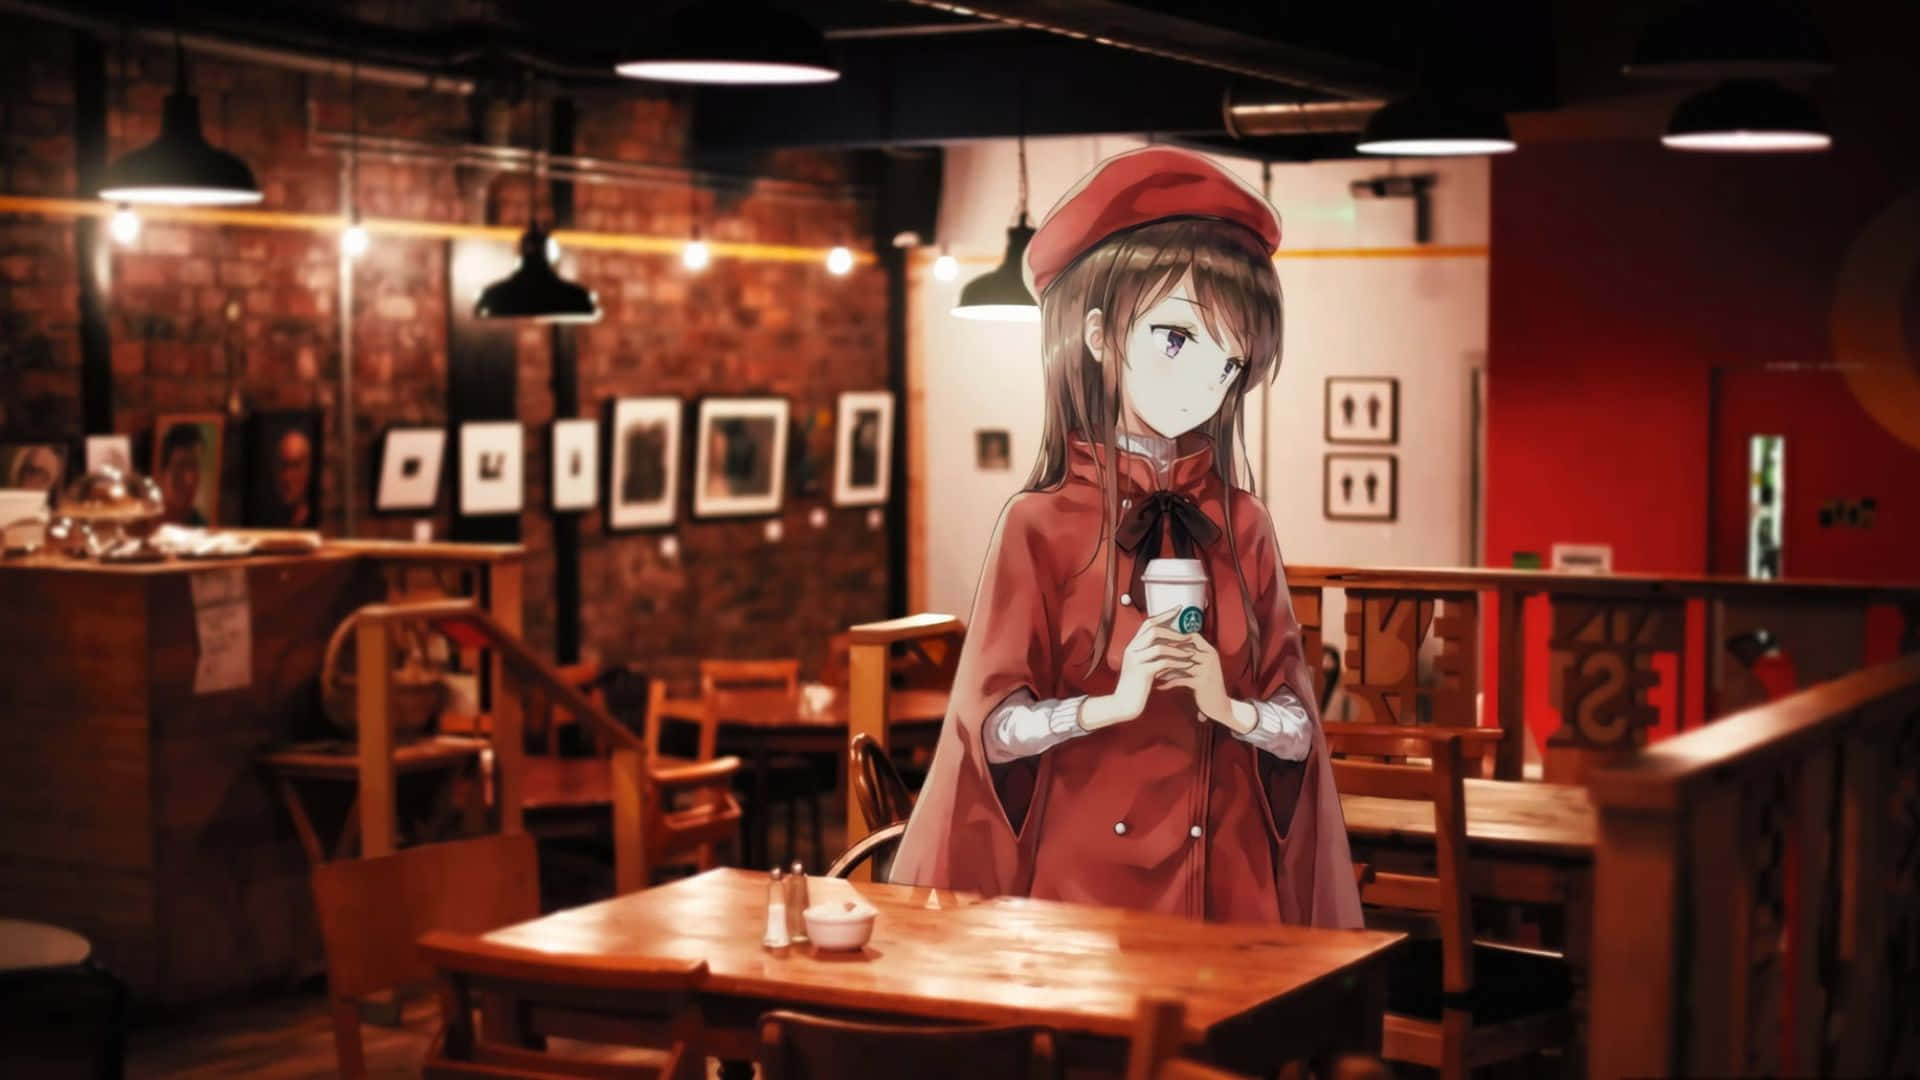 Download Anime Cafe Background 1920 X 1080 